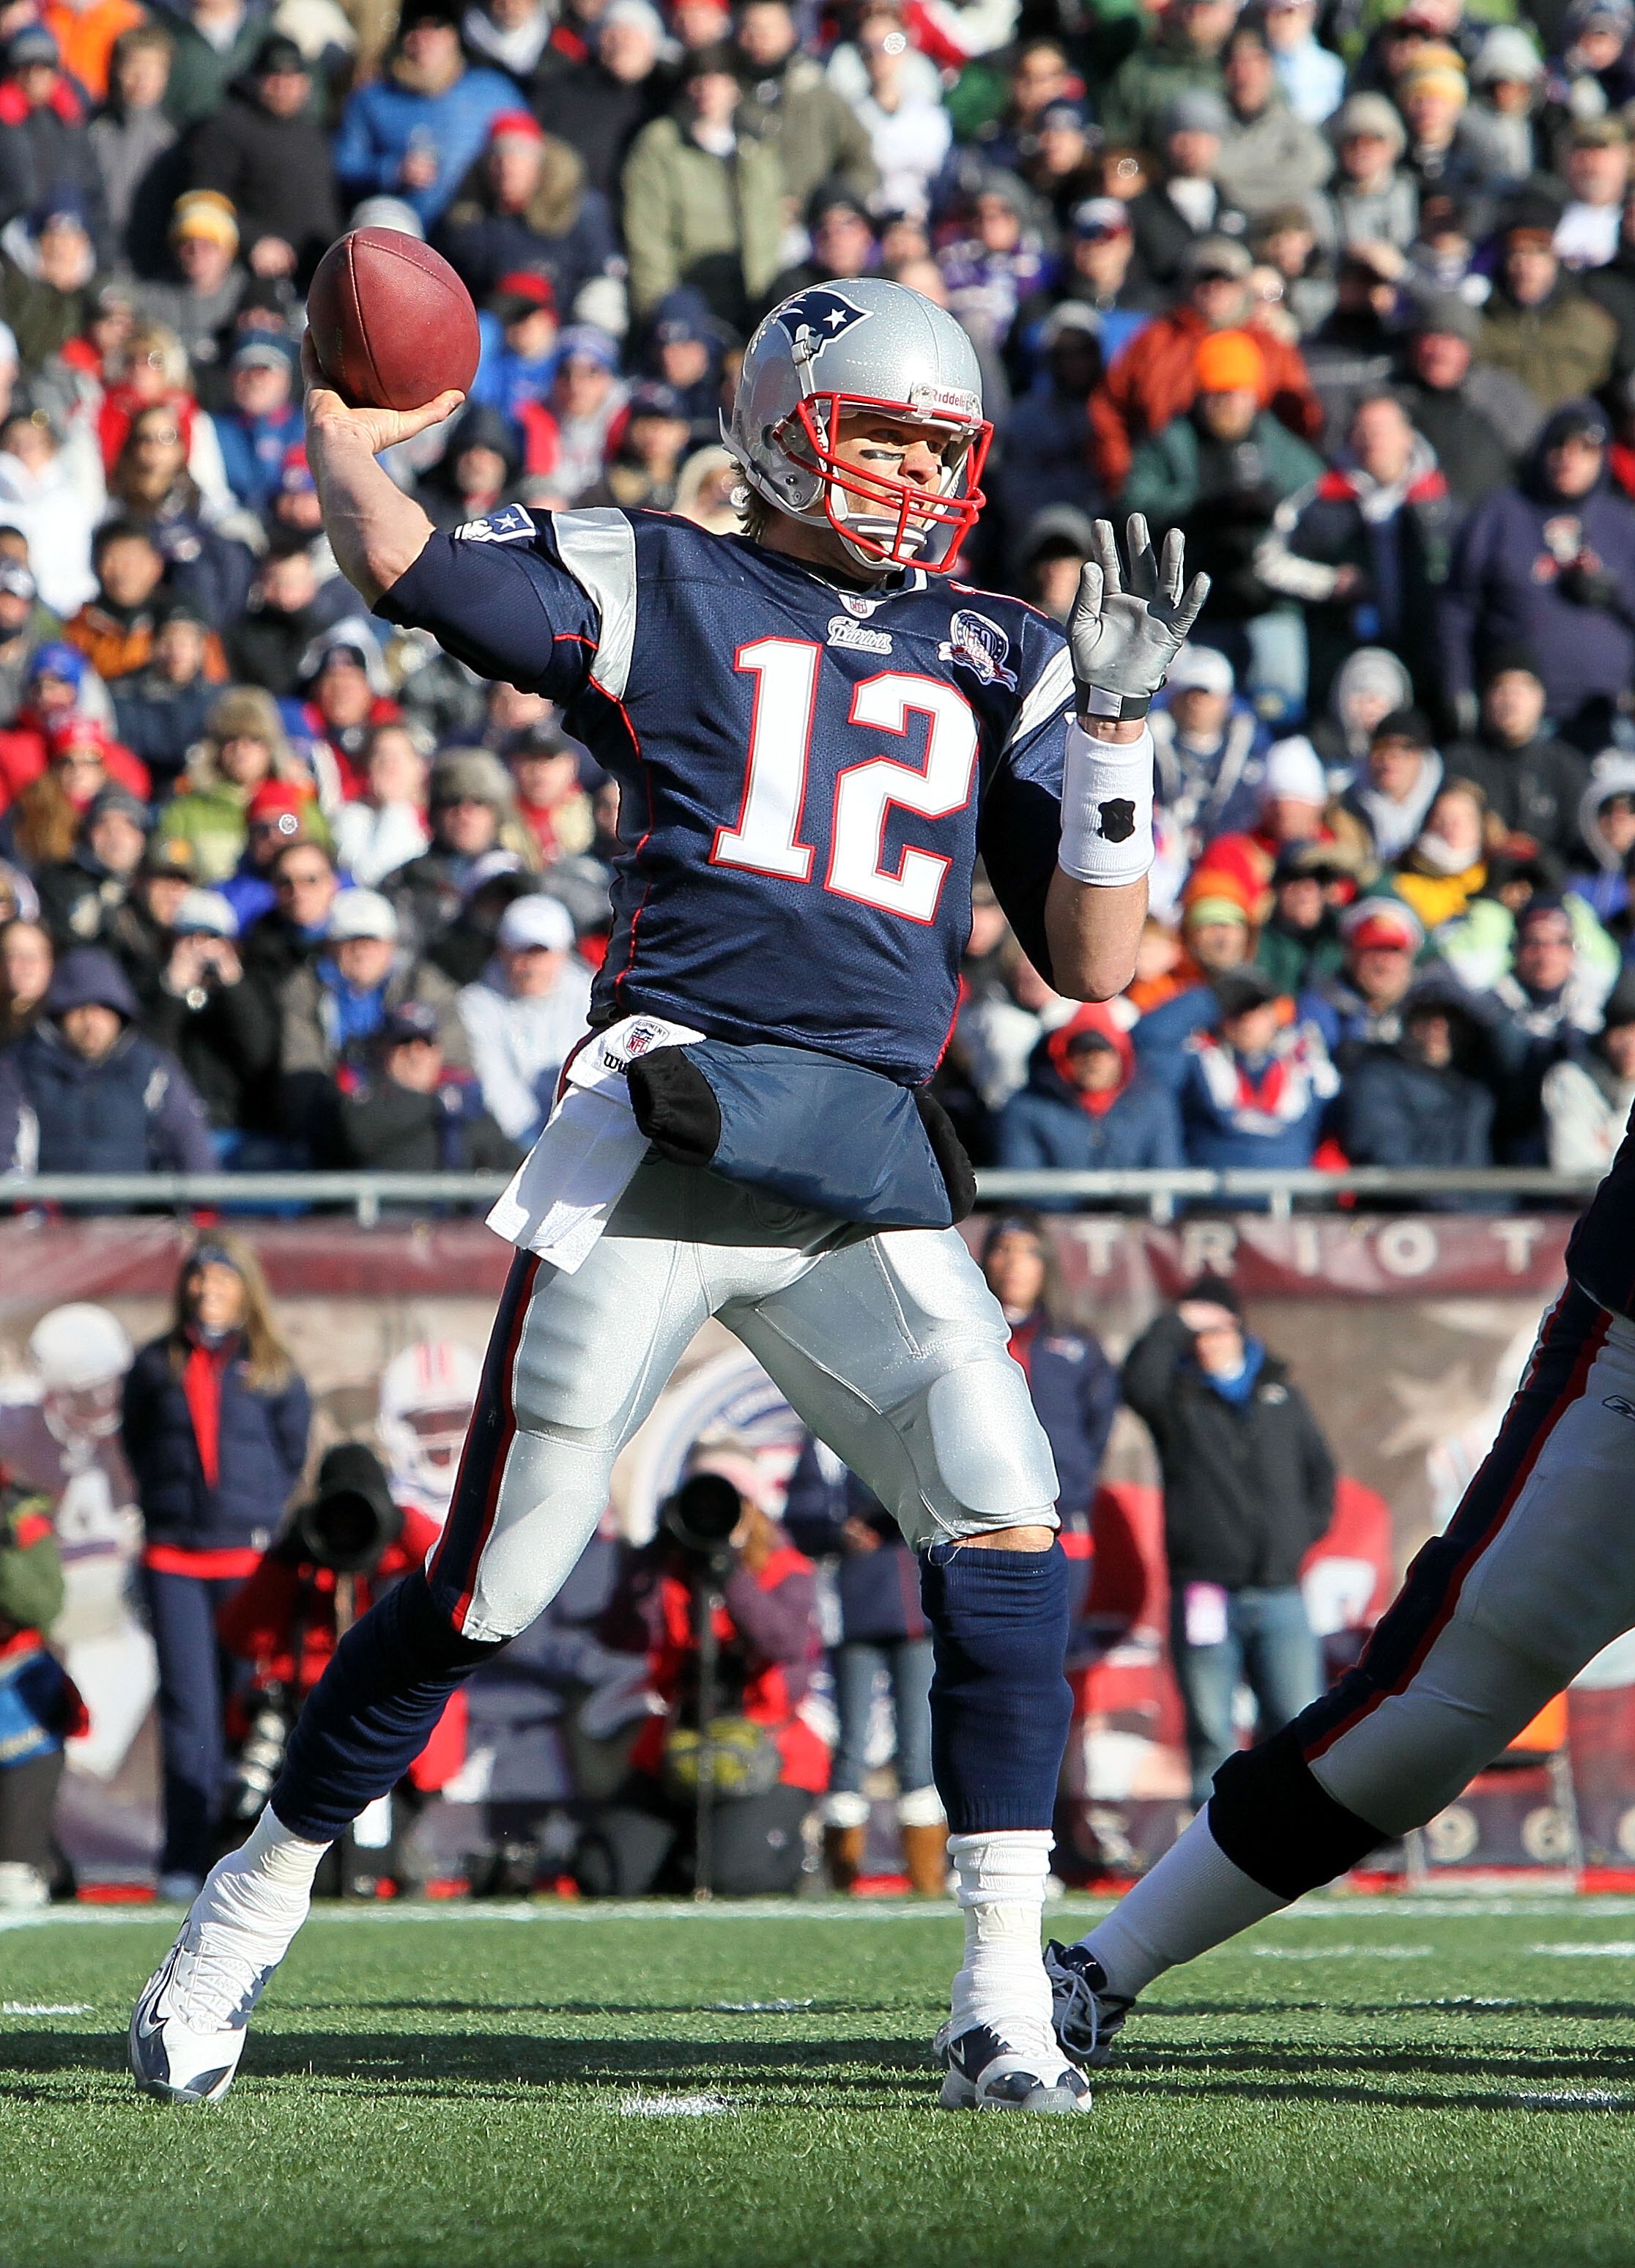 FOXBORO, MA - JANUARY 10:  Tom Brady #12 of the New England Patriots throws a pass against the Baltimore Ravens during the 2010 AFC wild-card playoff game at Gillette Stadium on January 10, 2010 in Foxboro, Massachusetts. The Ravens won 33-14. (Photo by J